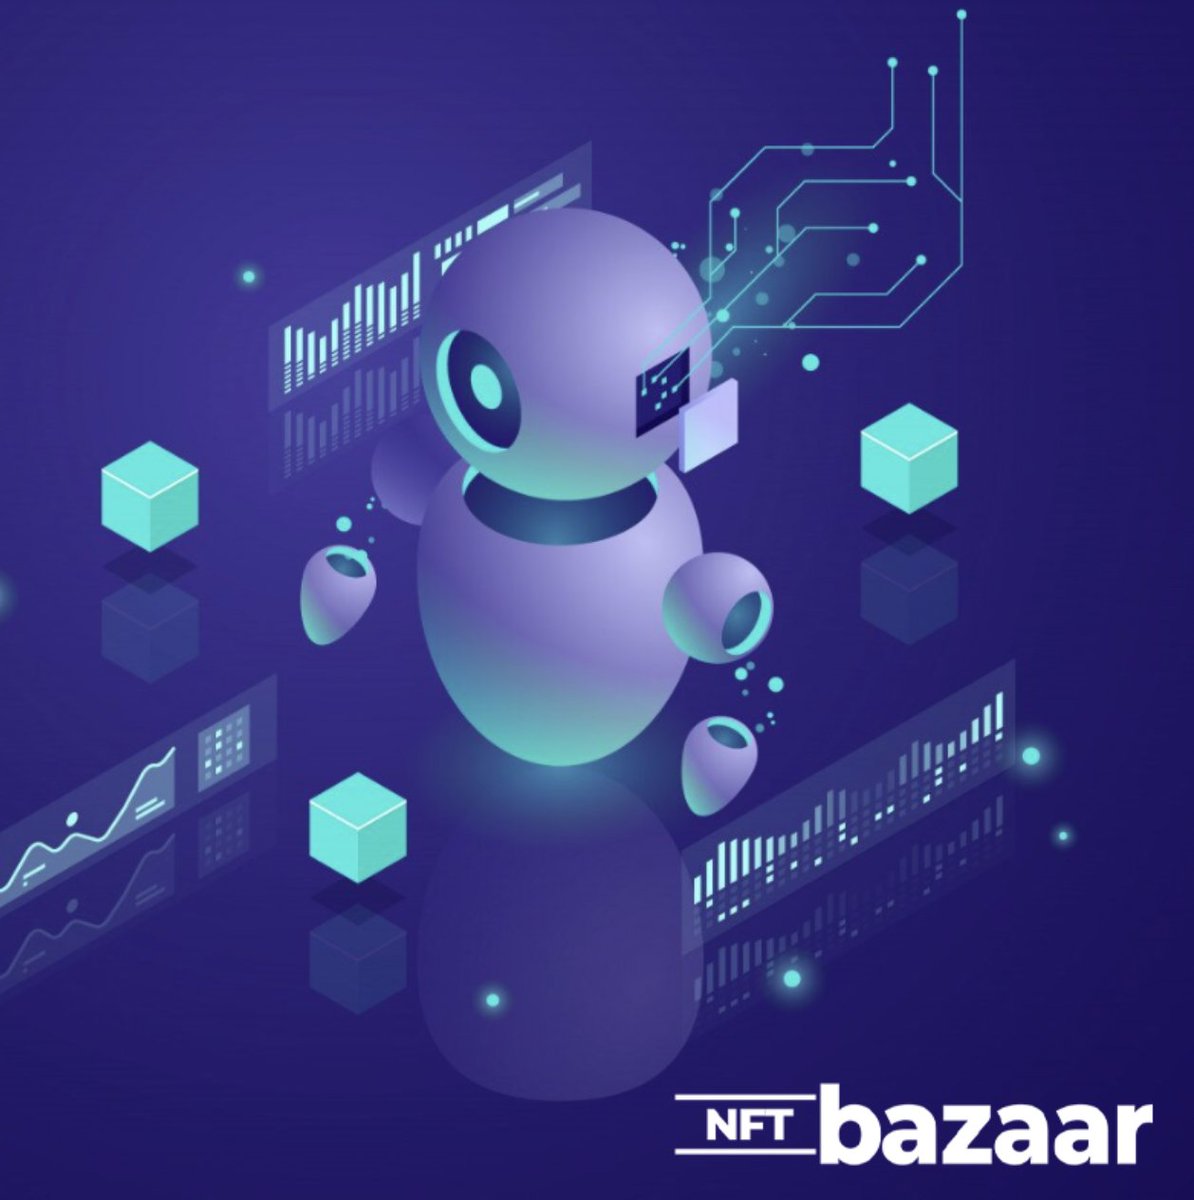 Designing Digital Destinations🖥️ Unlock the potential of your NFT collection with a custom-designed website from NFT Bazaar. We specialize in creating engaging and user-friendly platforms that showcase your artistry. Let's build your online masterpiece! #NFTPlatform #NFT